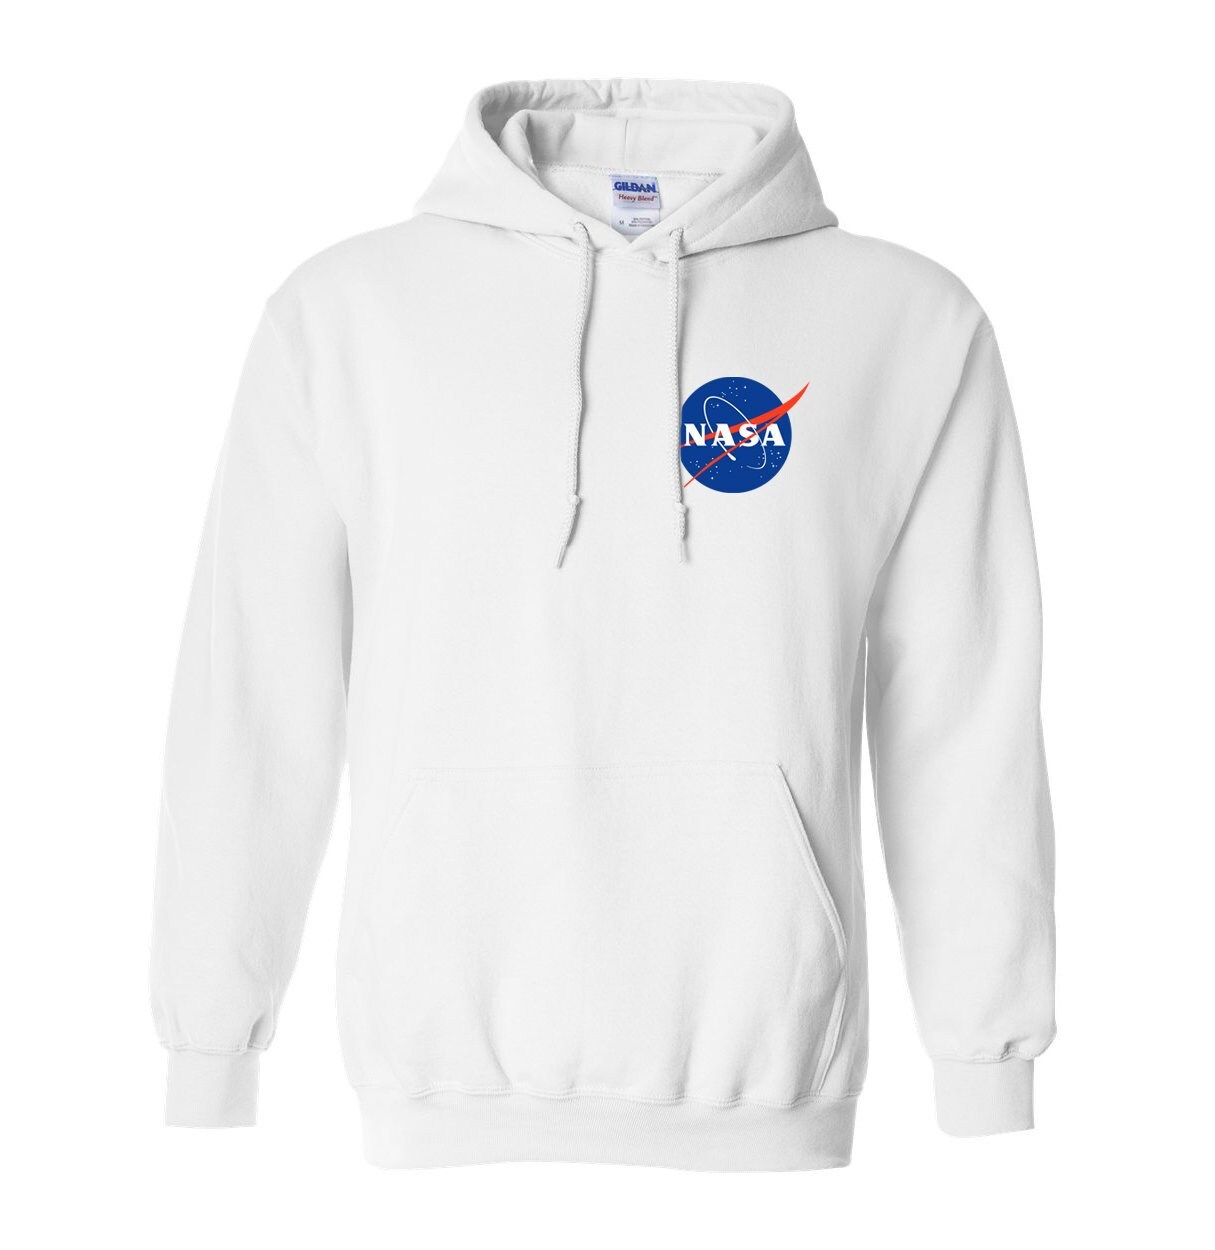 Colors All Youth Available Licensed Sizes Hoodie Space NASA and - Insignia Hoodie Adult Meatball Hoodie Etsy NASA Officially